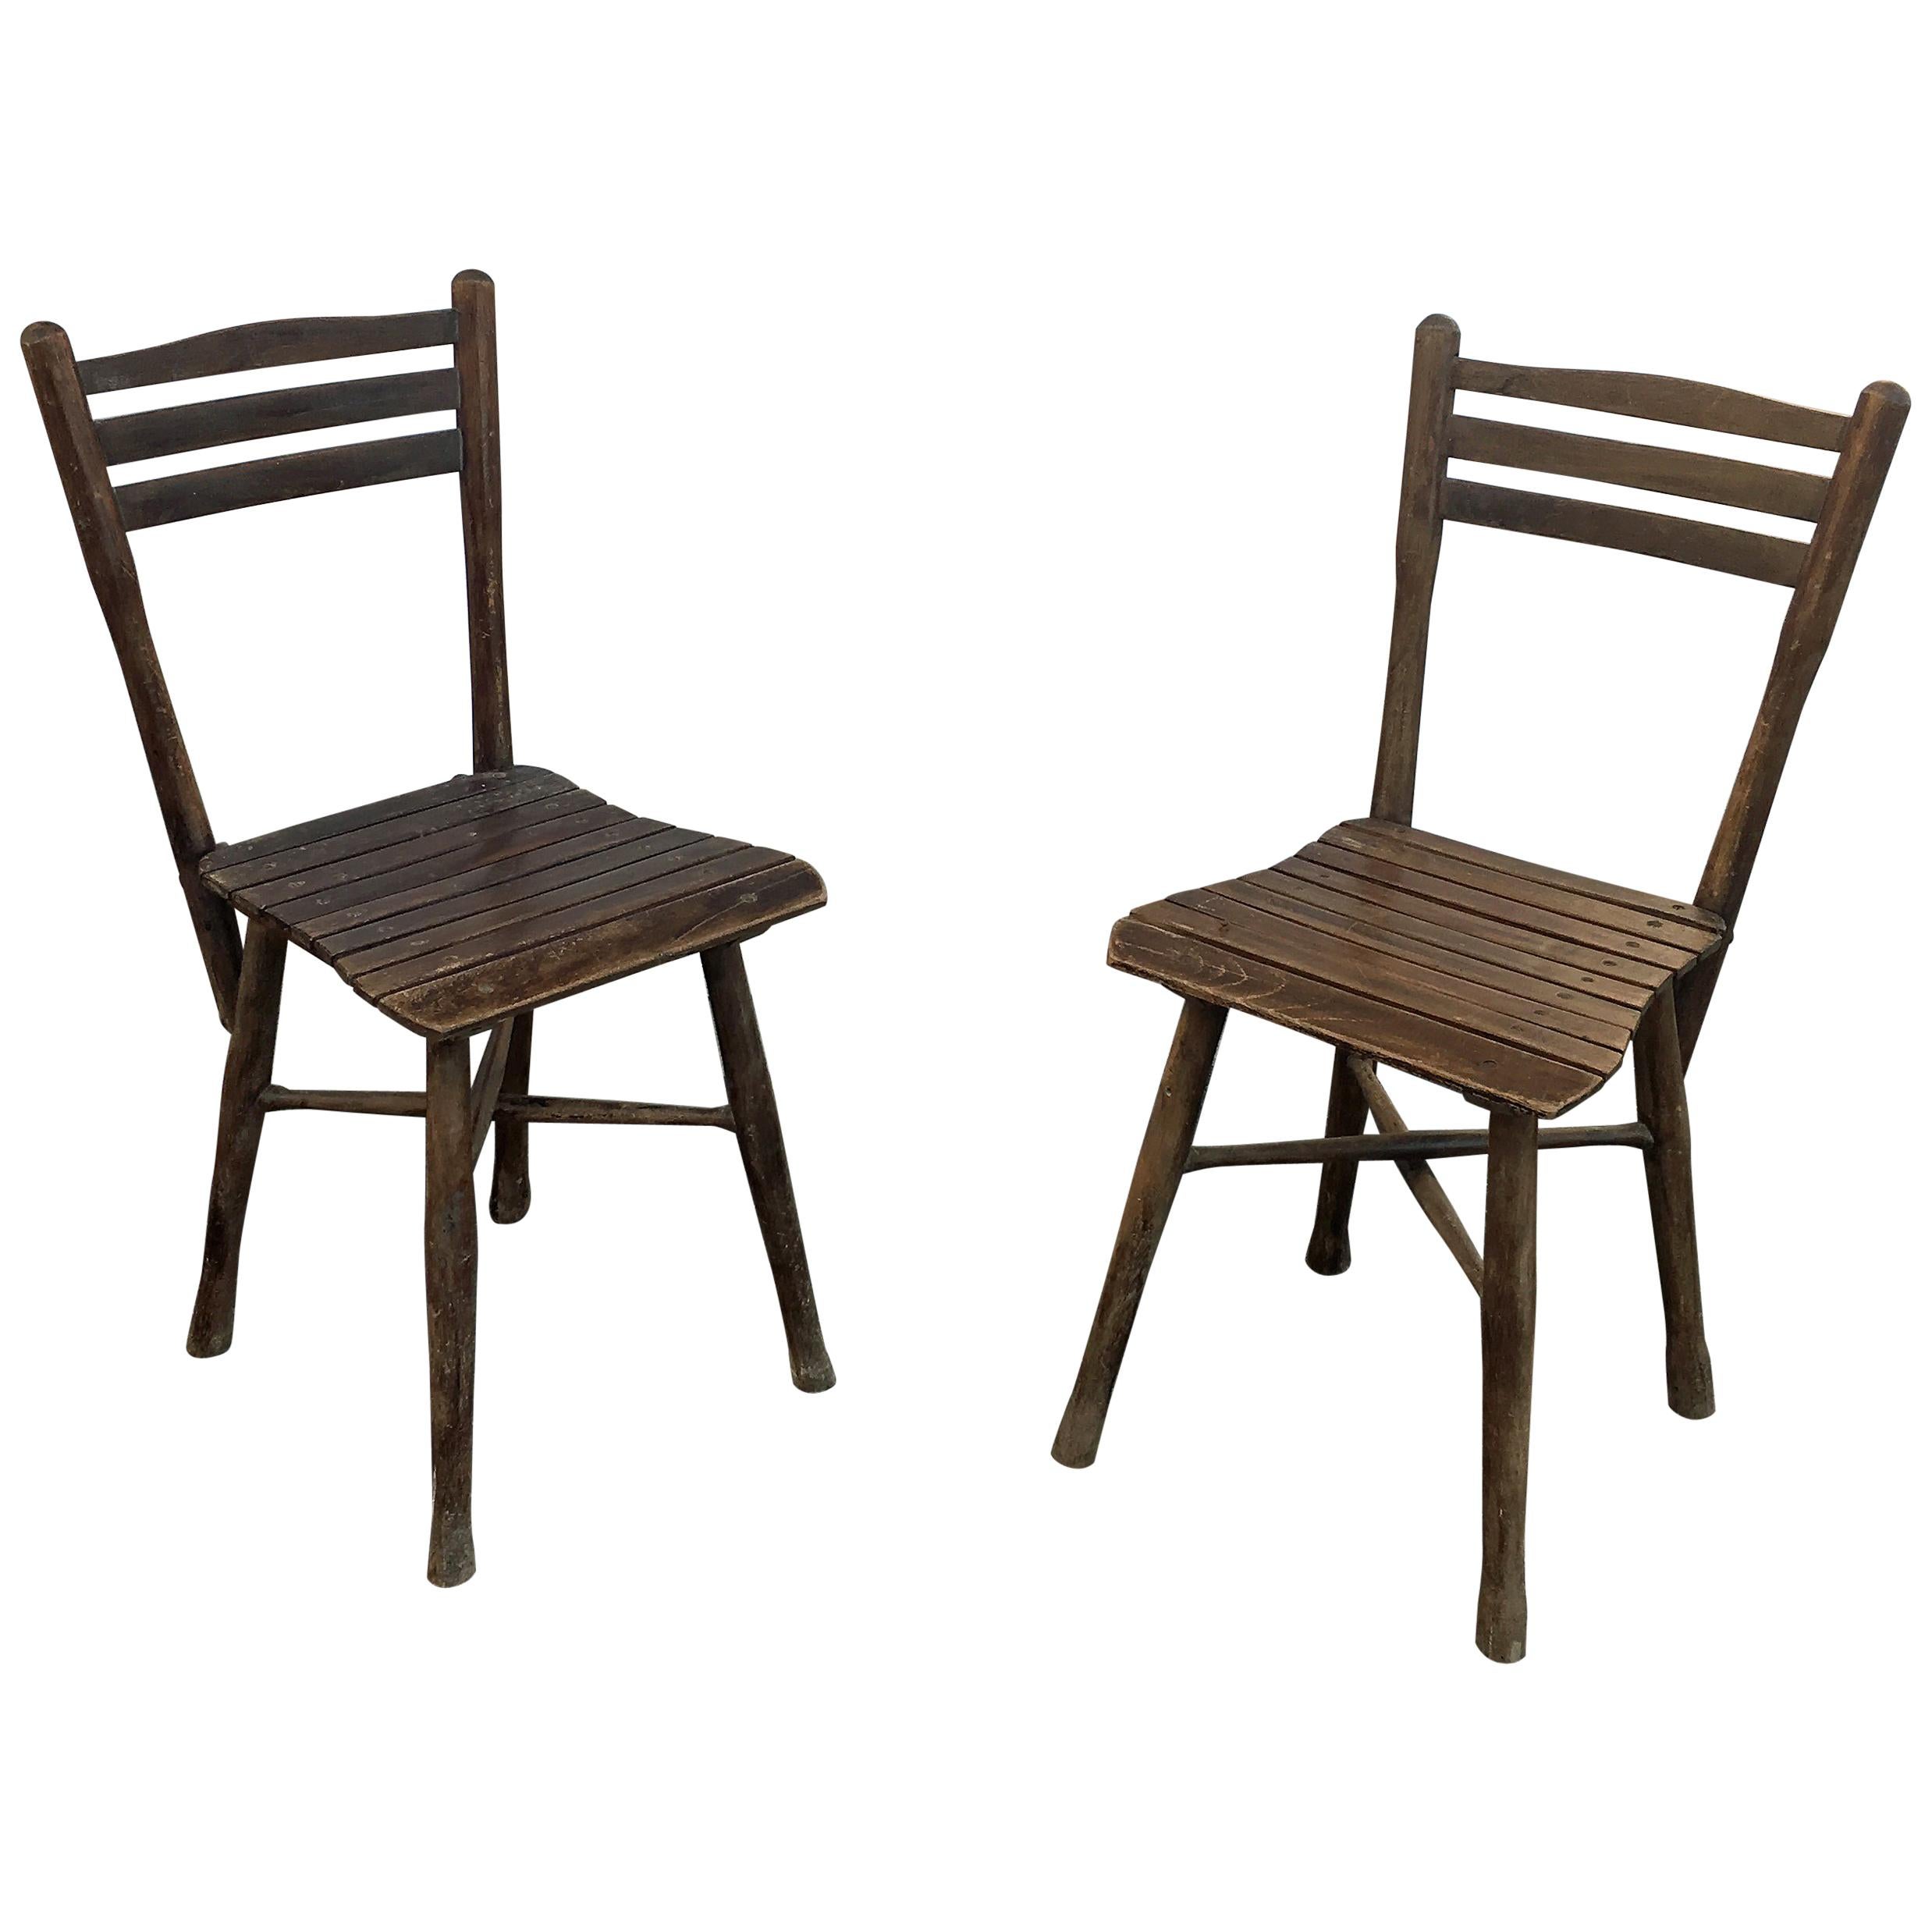 Pair of Chairs in the Thonet Style, circa 1900